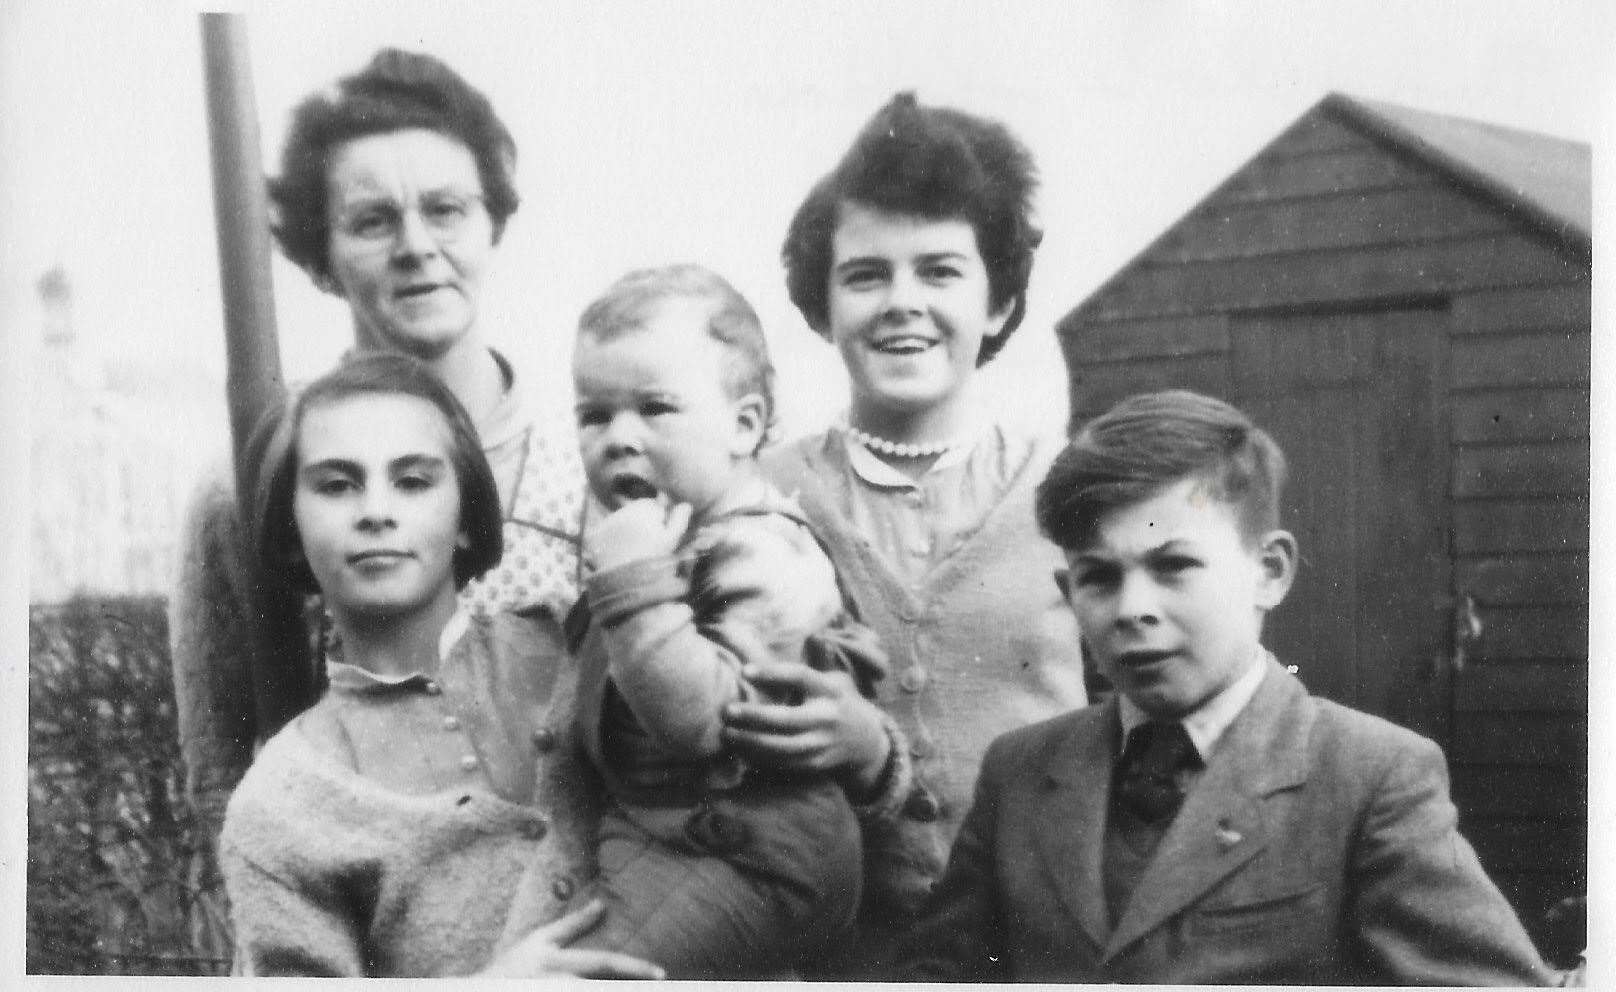 Phyllis with her four children, left to right, Eileen, Andrew, Linda and Malcolm in 1959/60